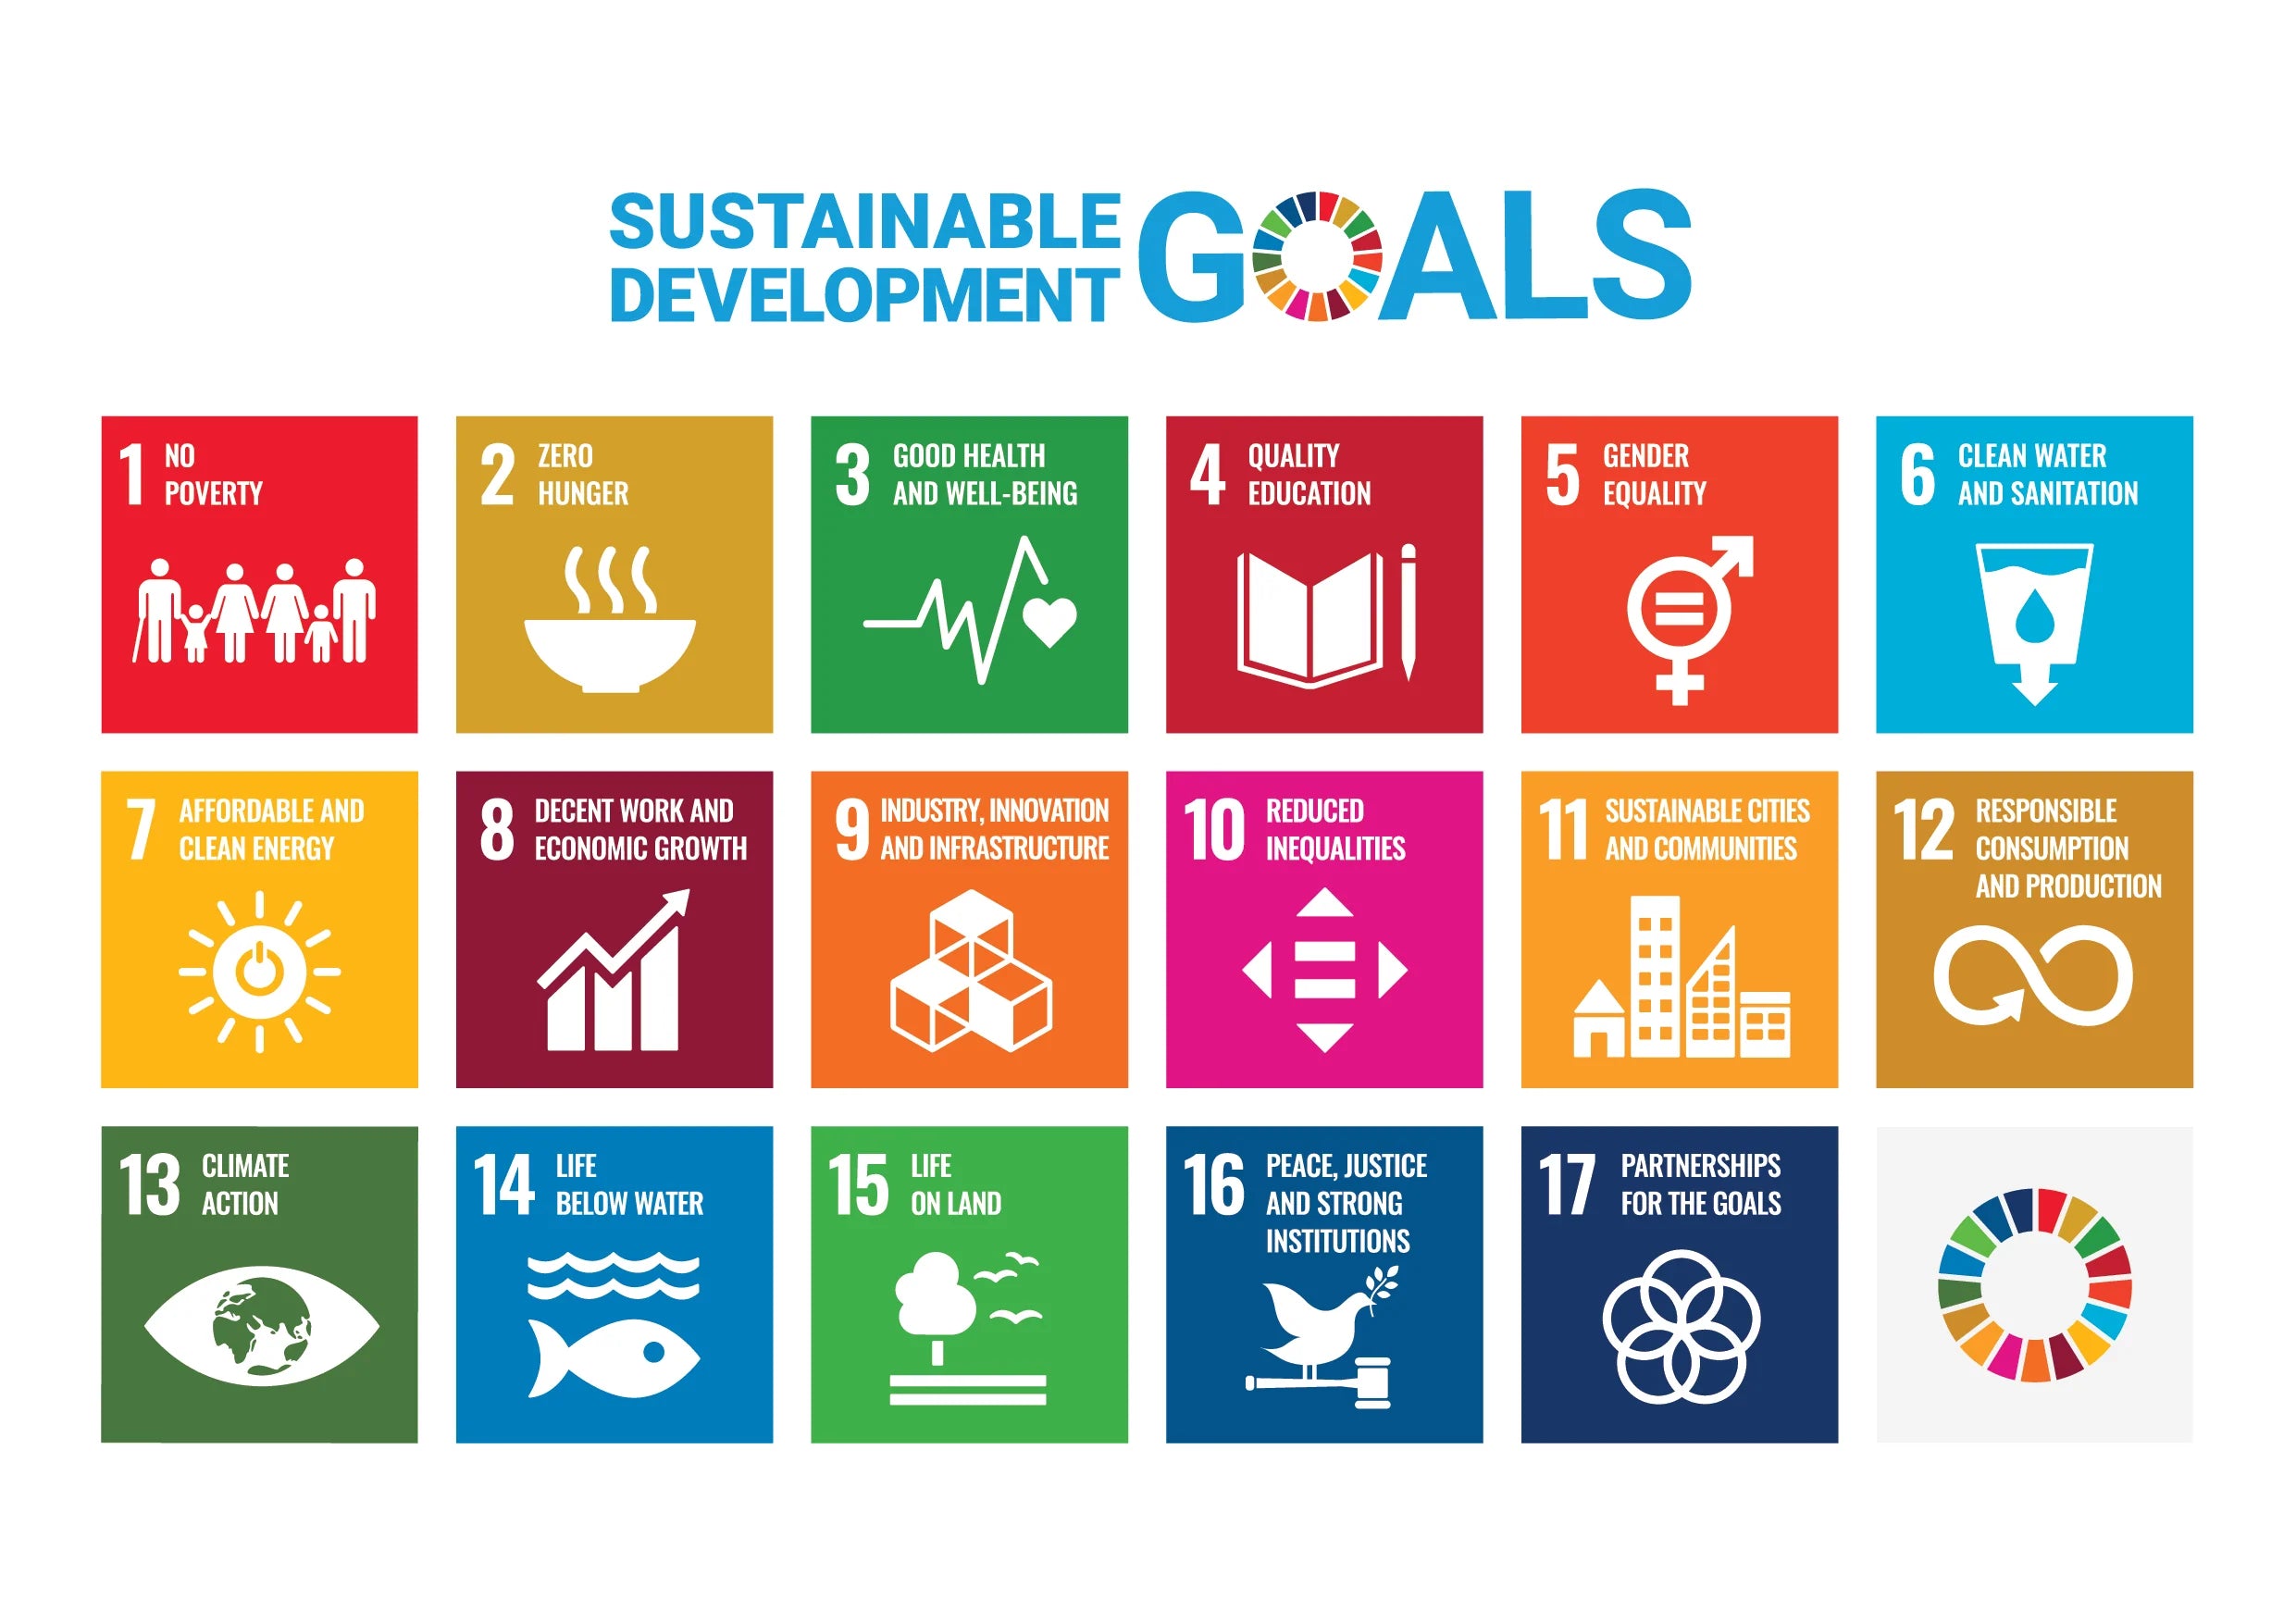 A Guide To The UN SDGs - Goal 15 Life On Land